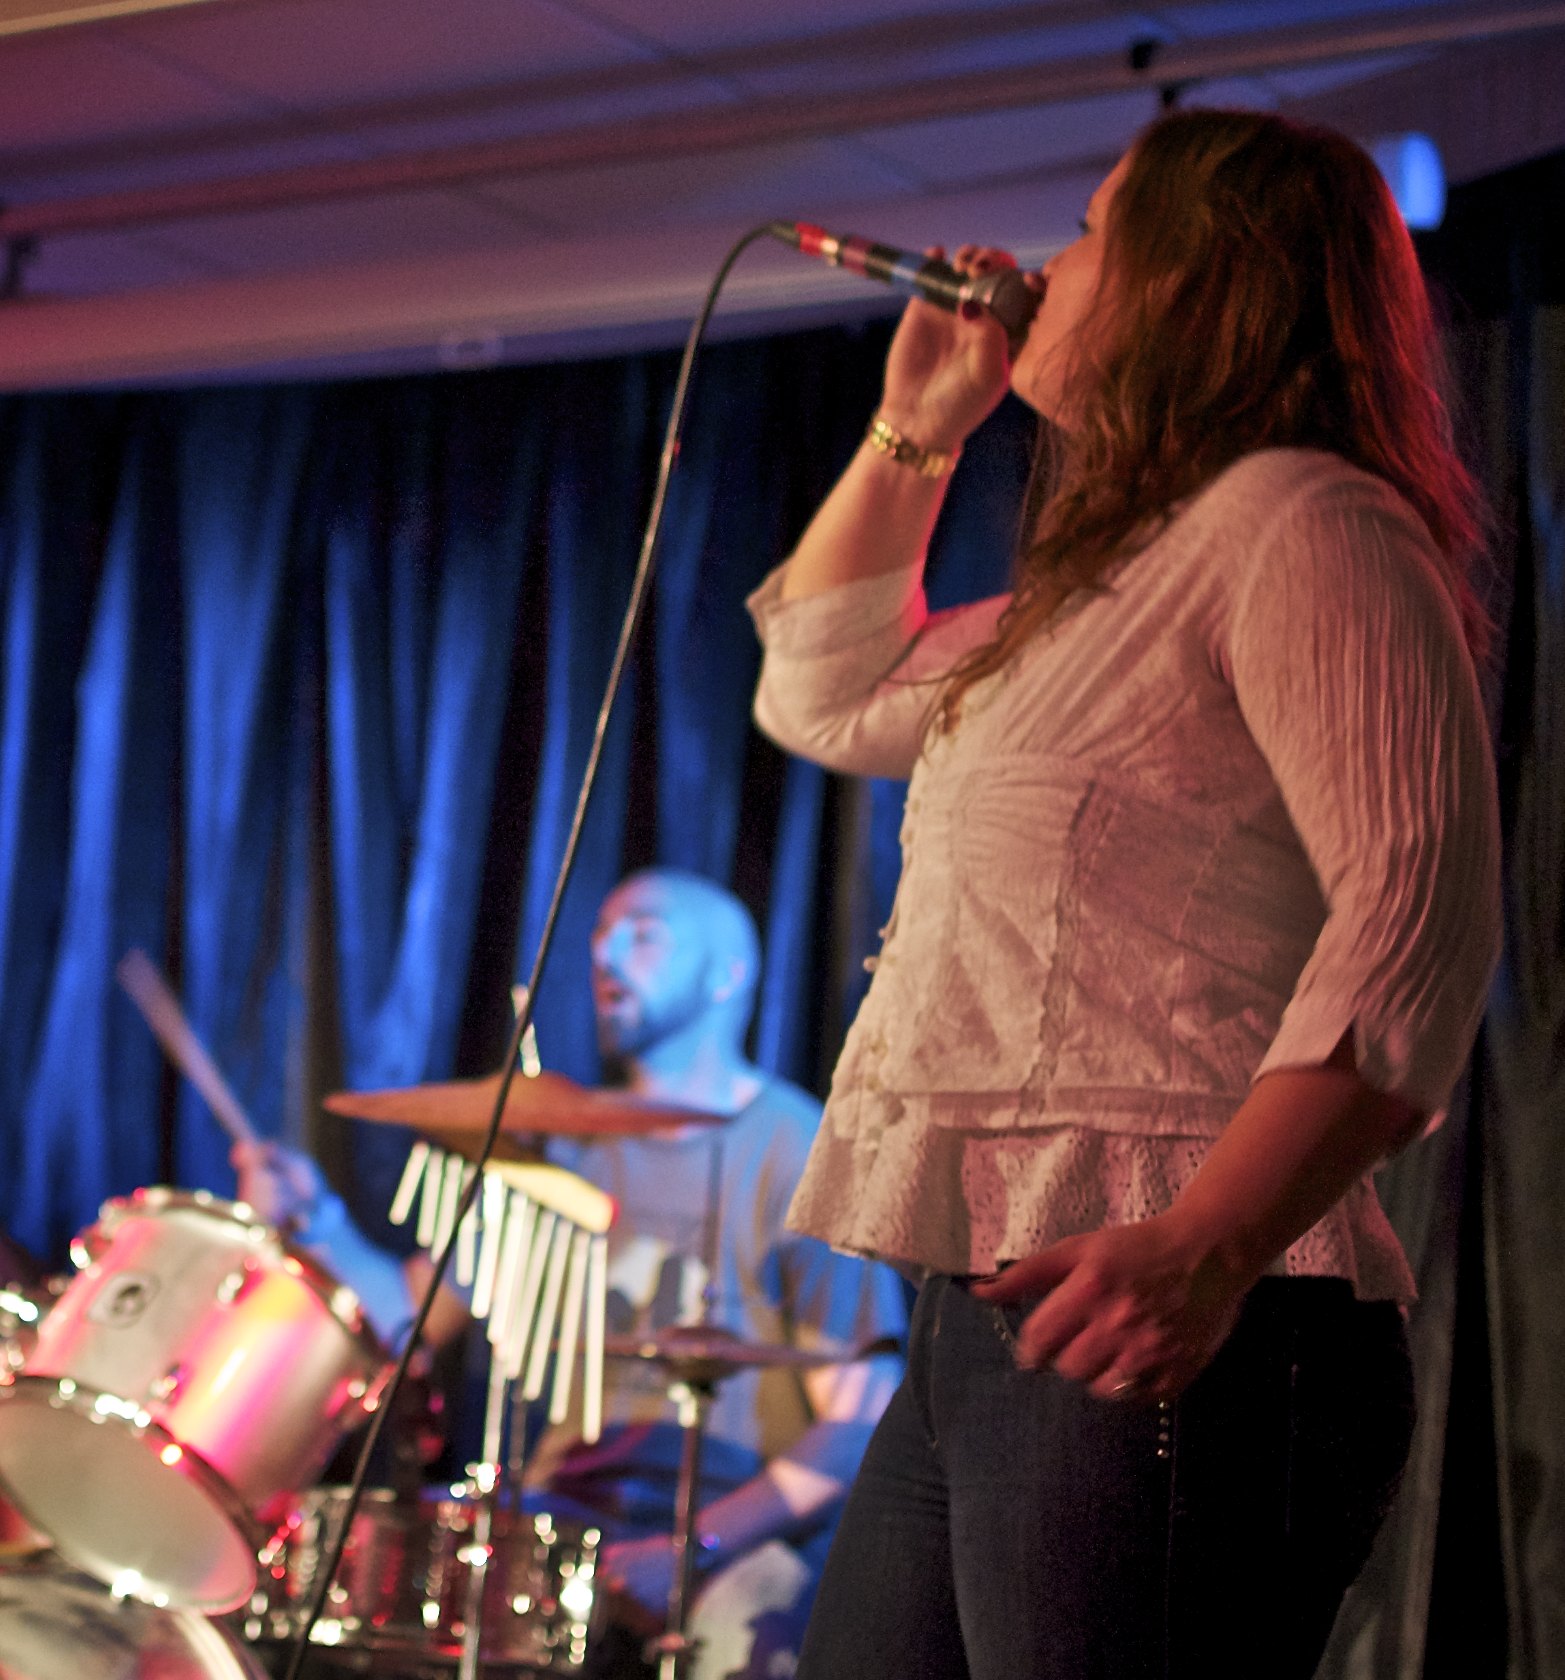 a woman singing into a microphone while standing in front of the drums